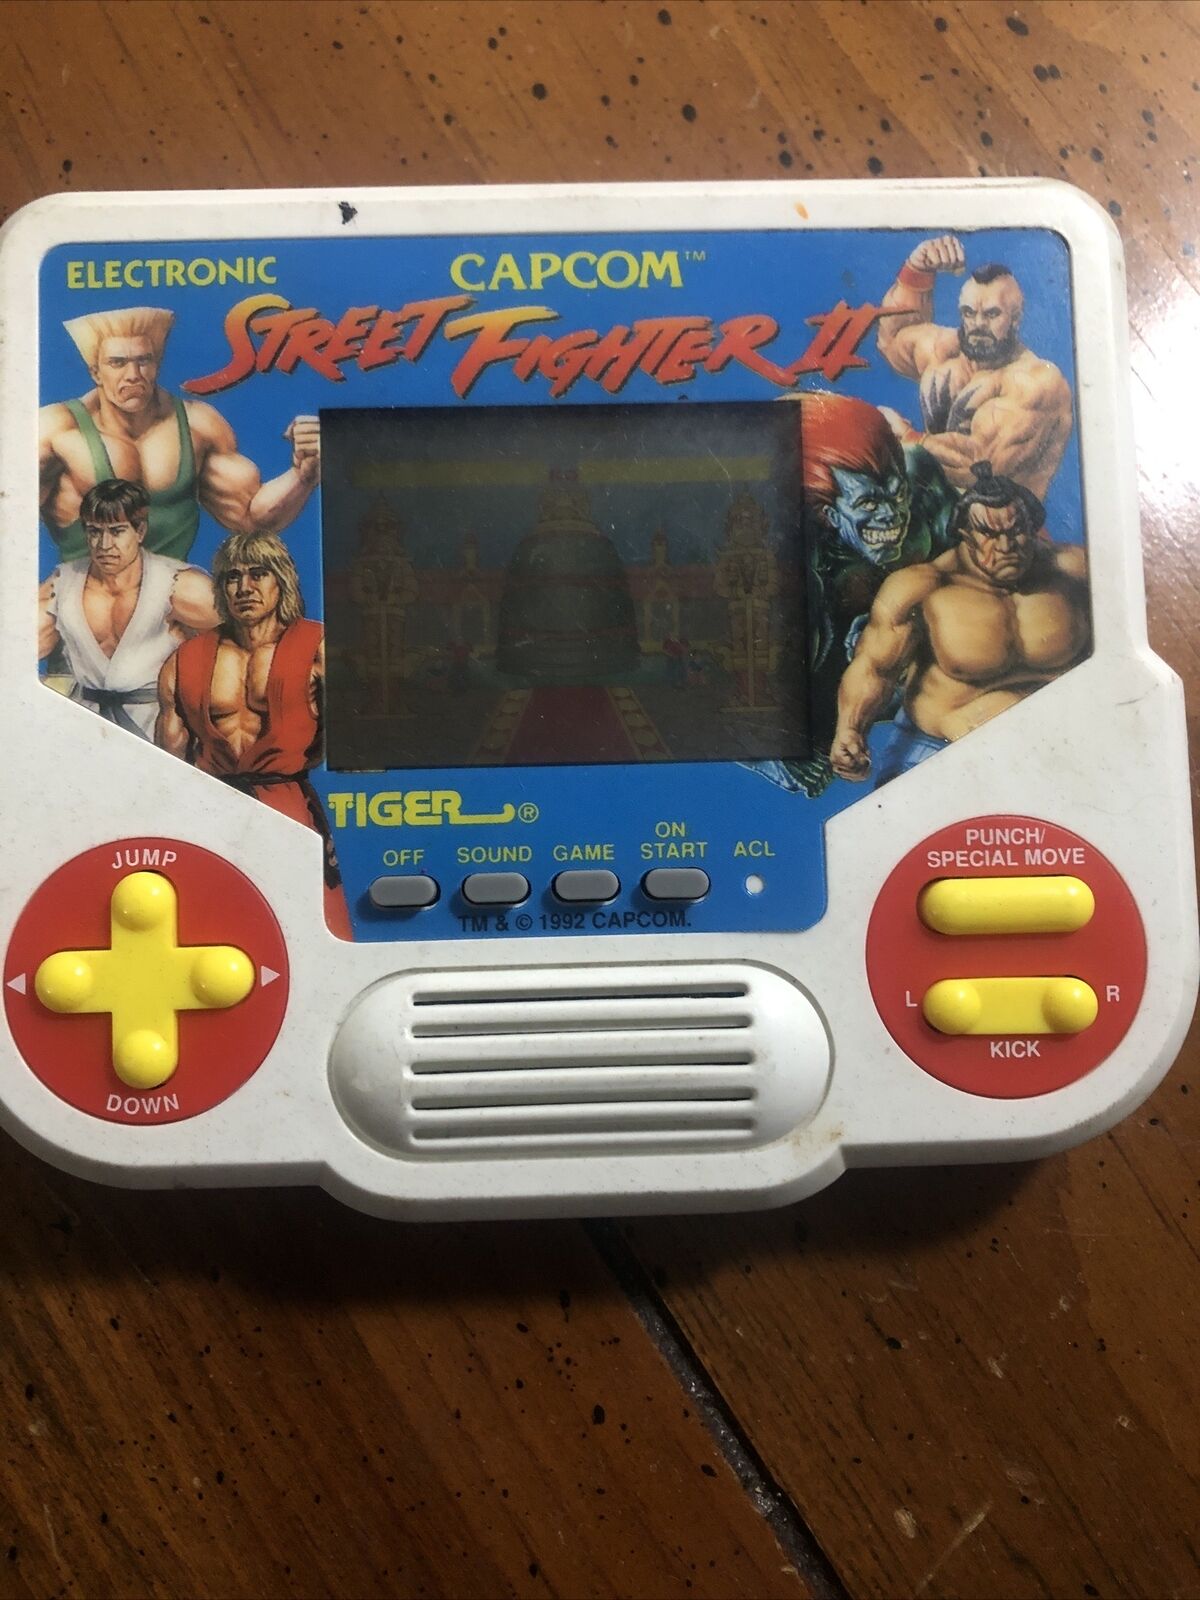 1988 Tiger Electronics Handheld Game Capcom Street Fighter II - CLEAN & WORKING